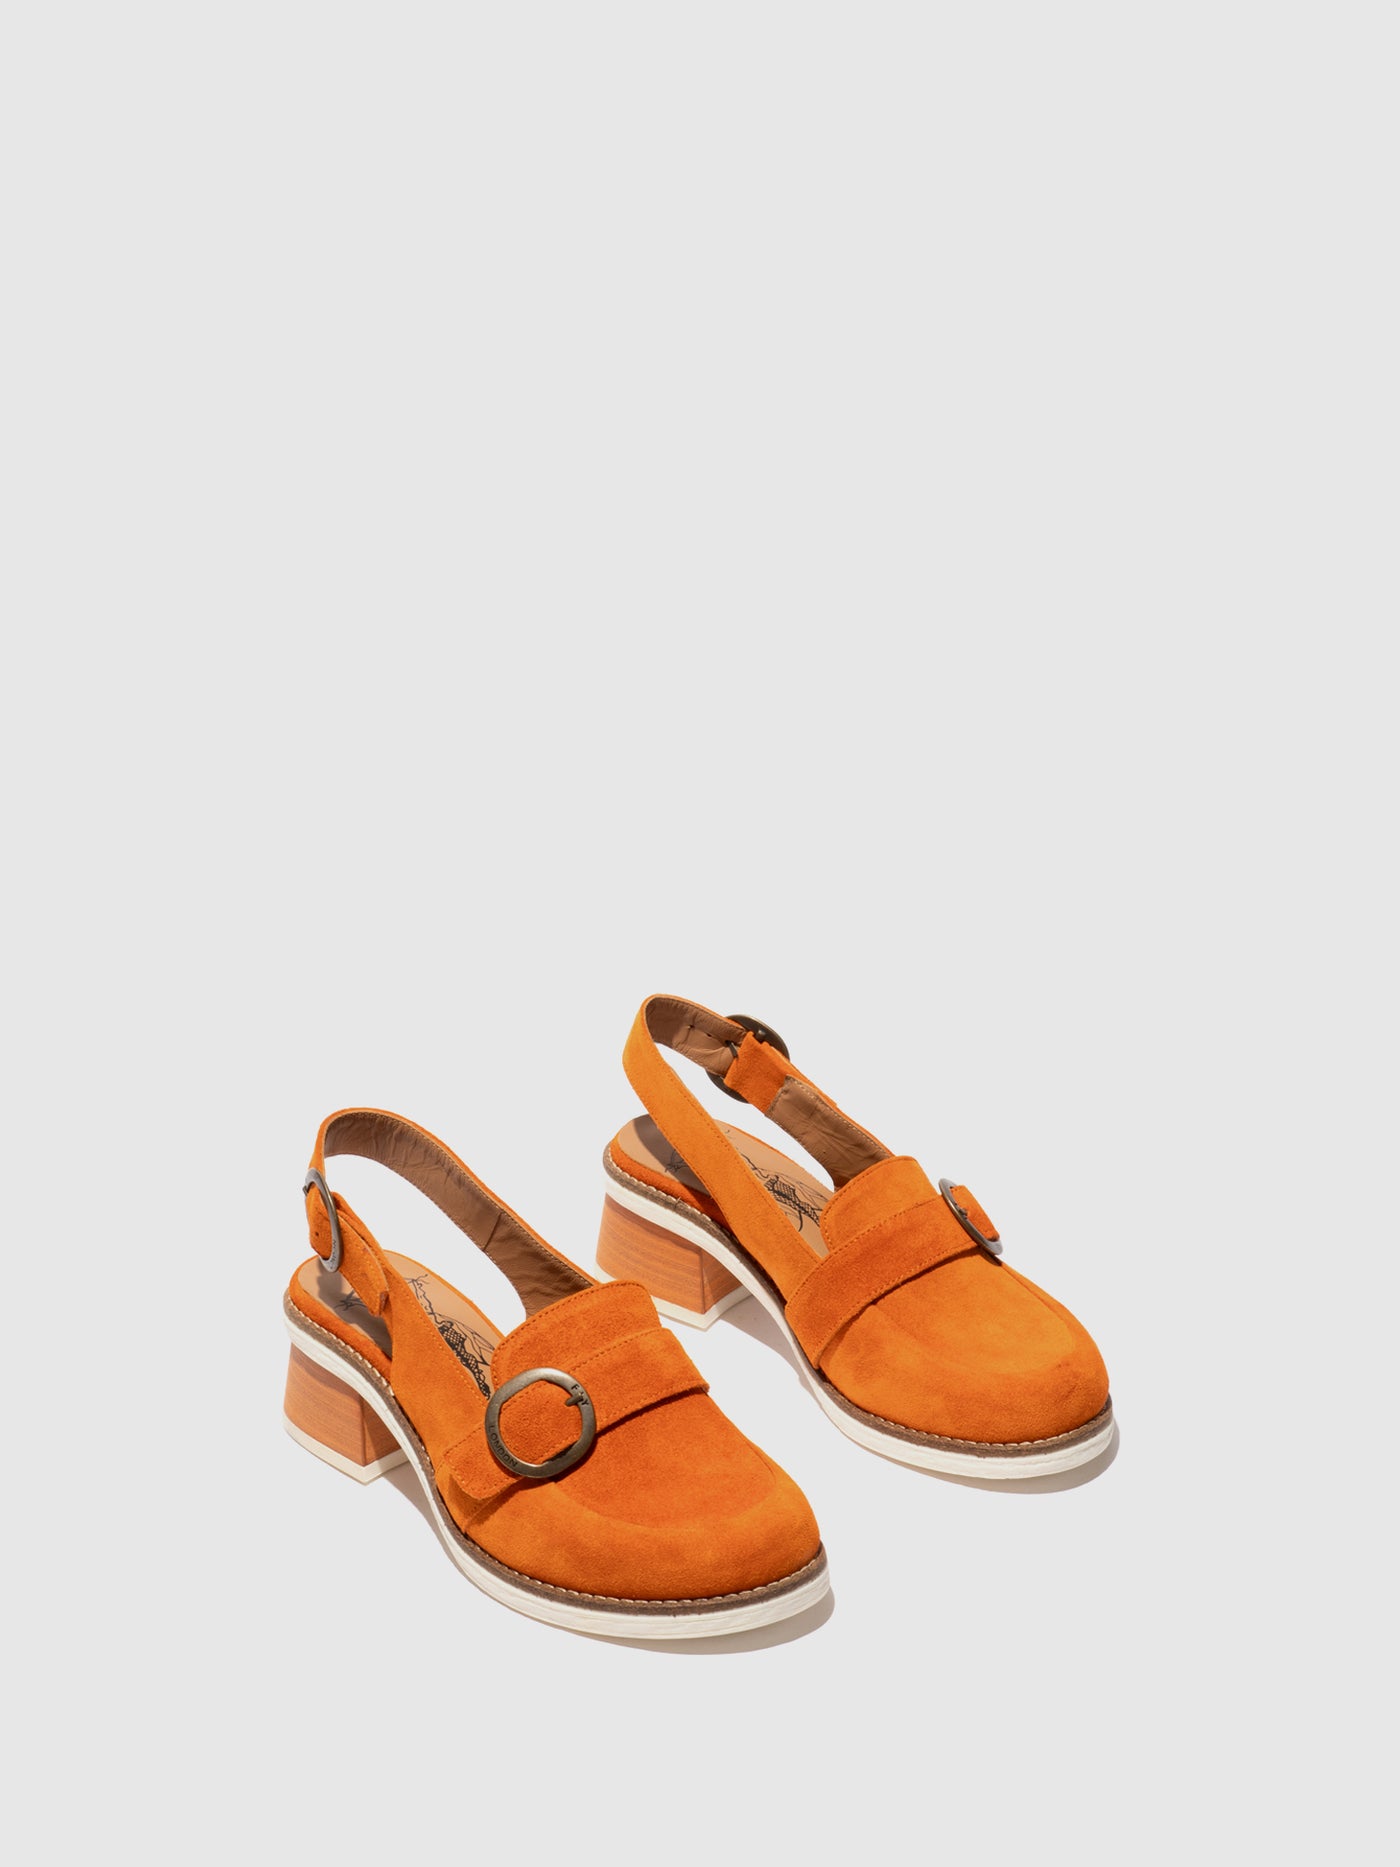 Buckle Shoes CUTH094FLY ORANGE